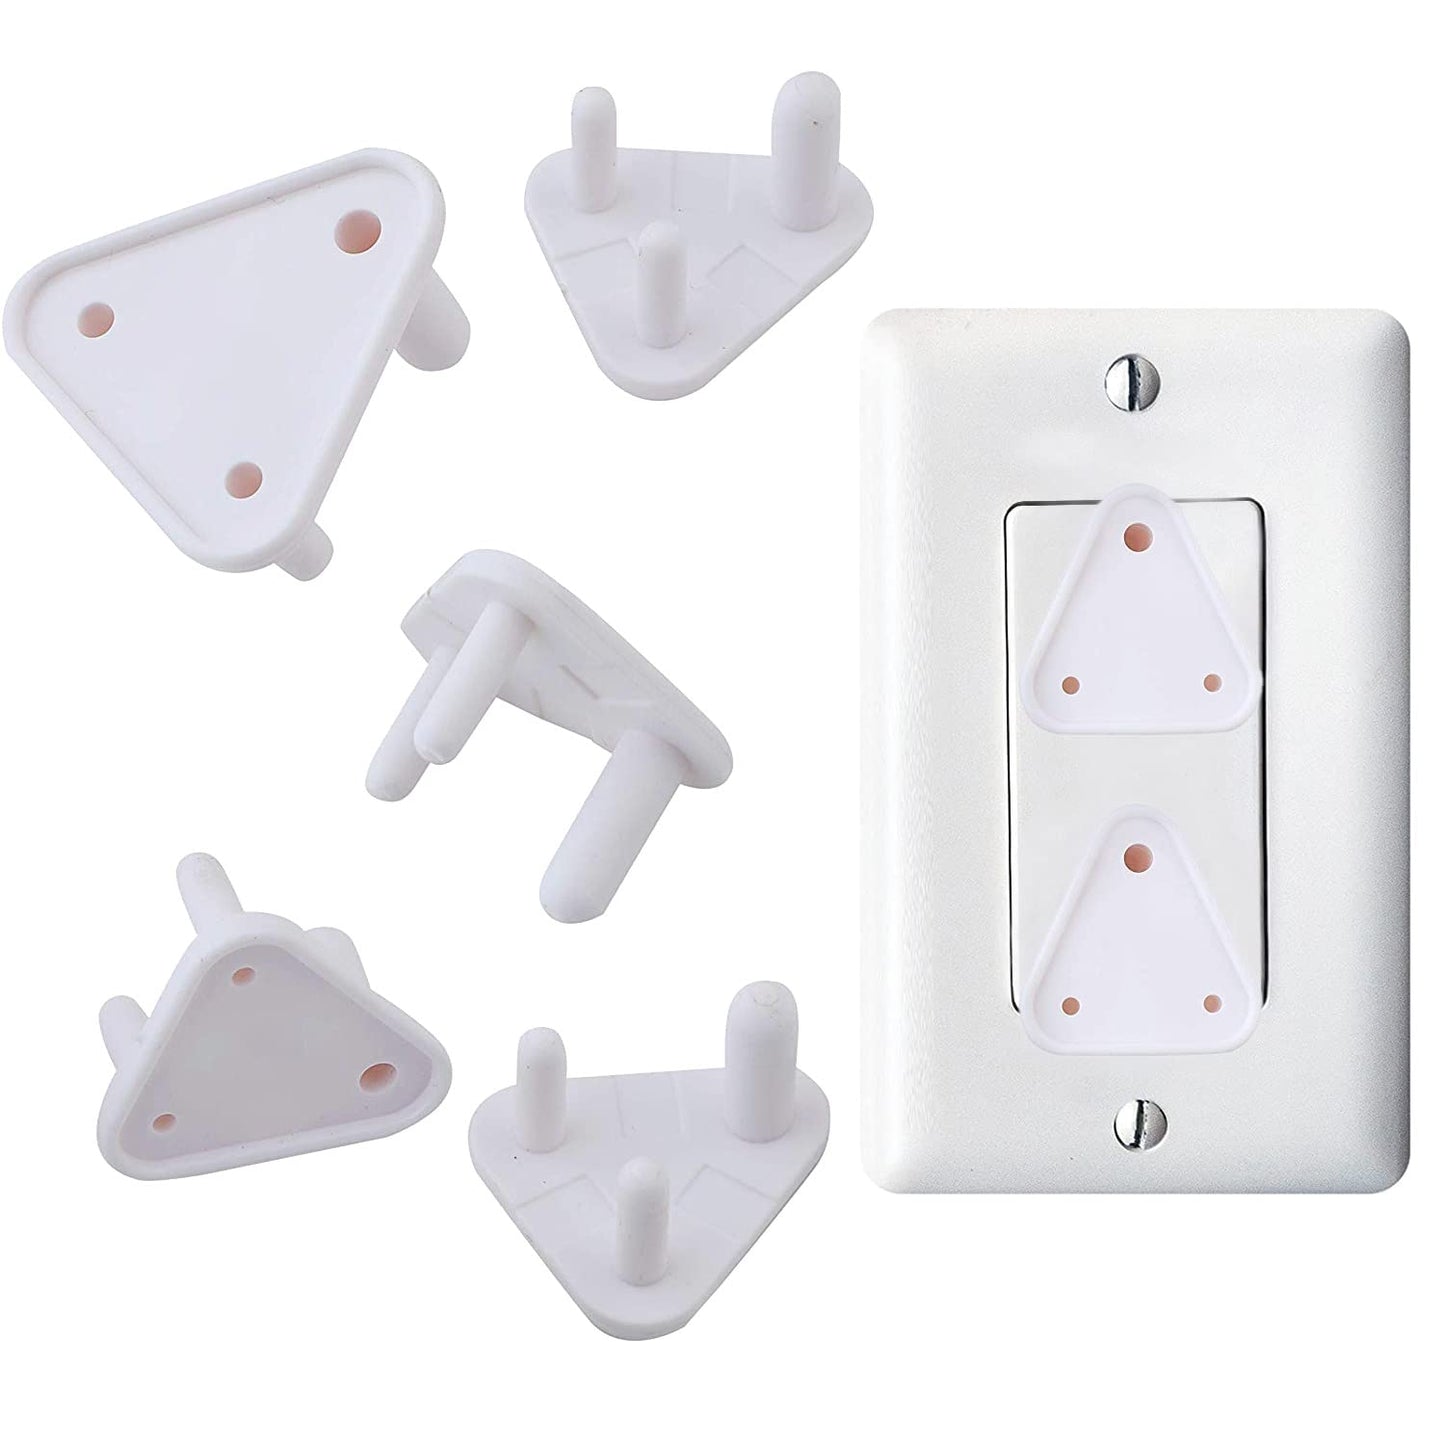 Baby Safety Electric Socket Plug Cover Guards - Pack of 6